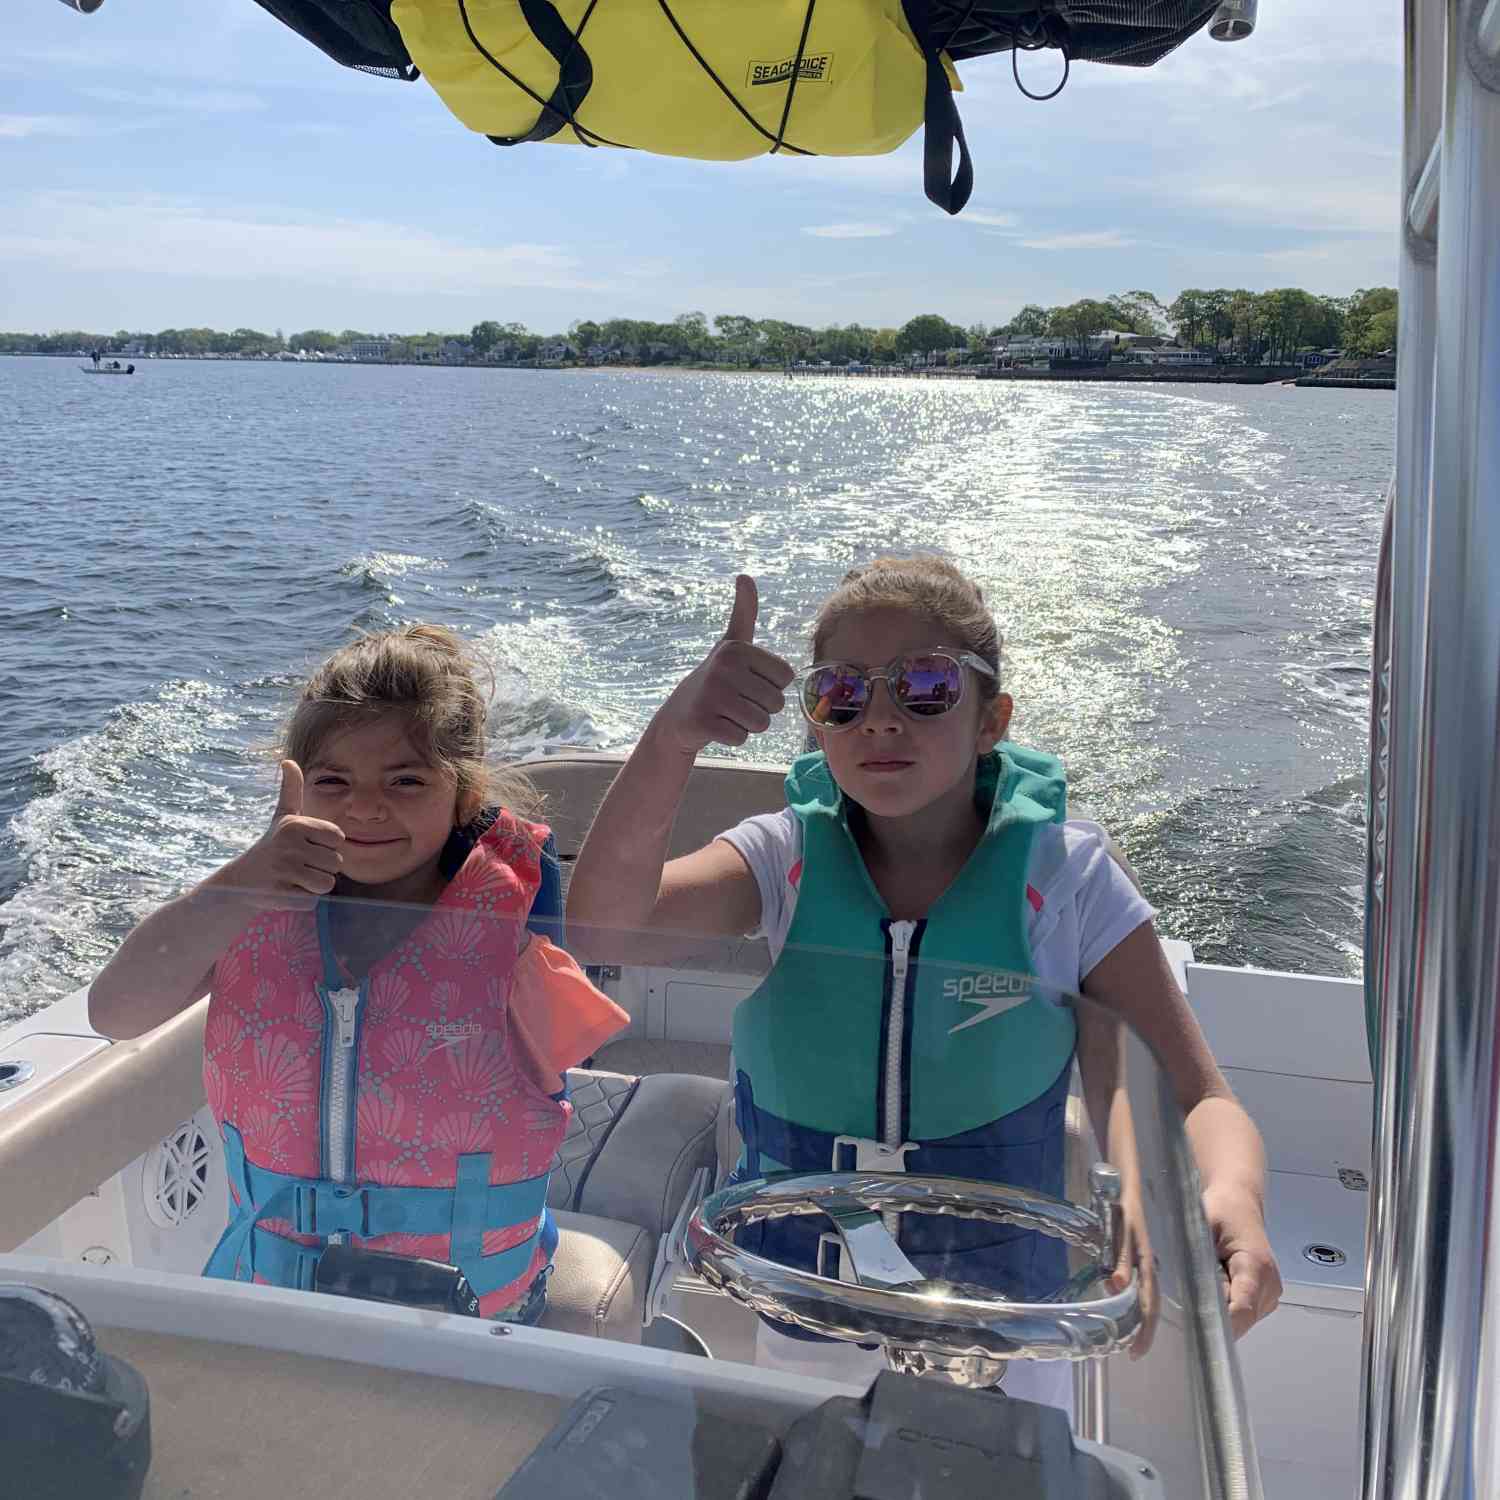 Title: Aye aye captain! - On board their Sportsman Open 212 Center Console - Location: Manasquan River, NJ. Participating in the Photo Contest #SportsmanMay2021